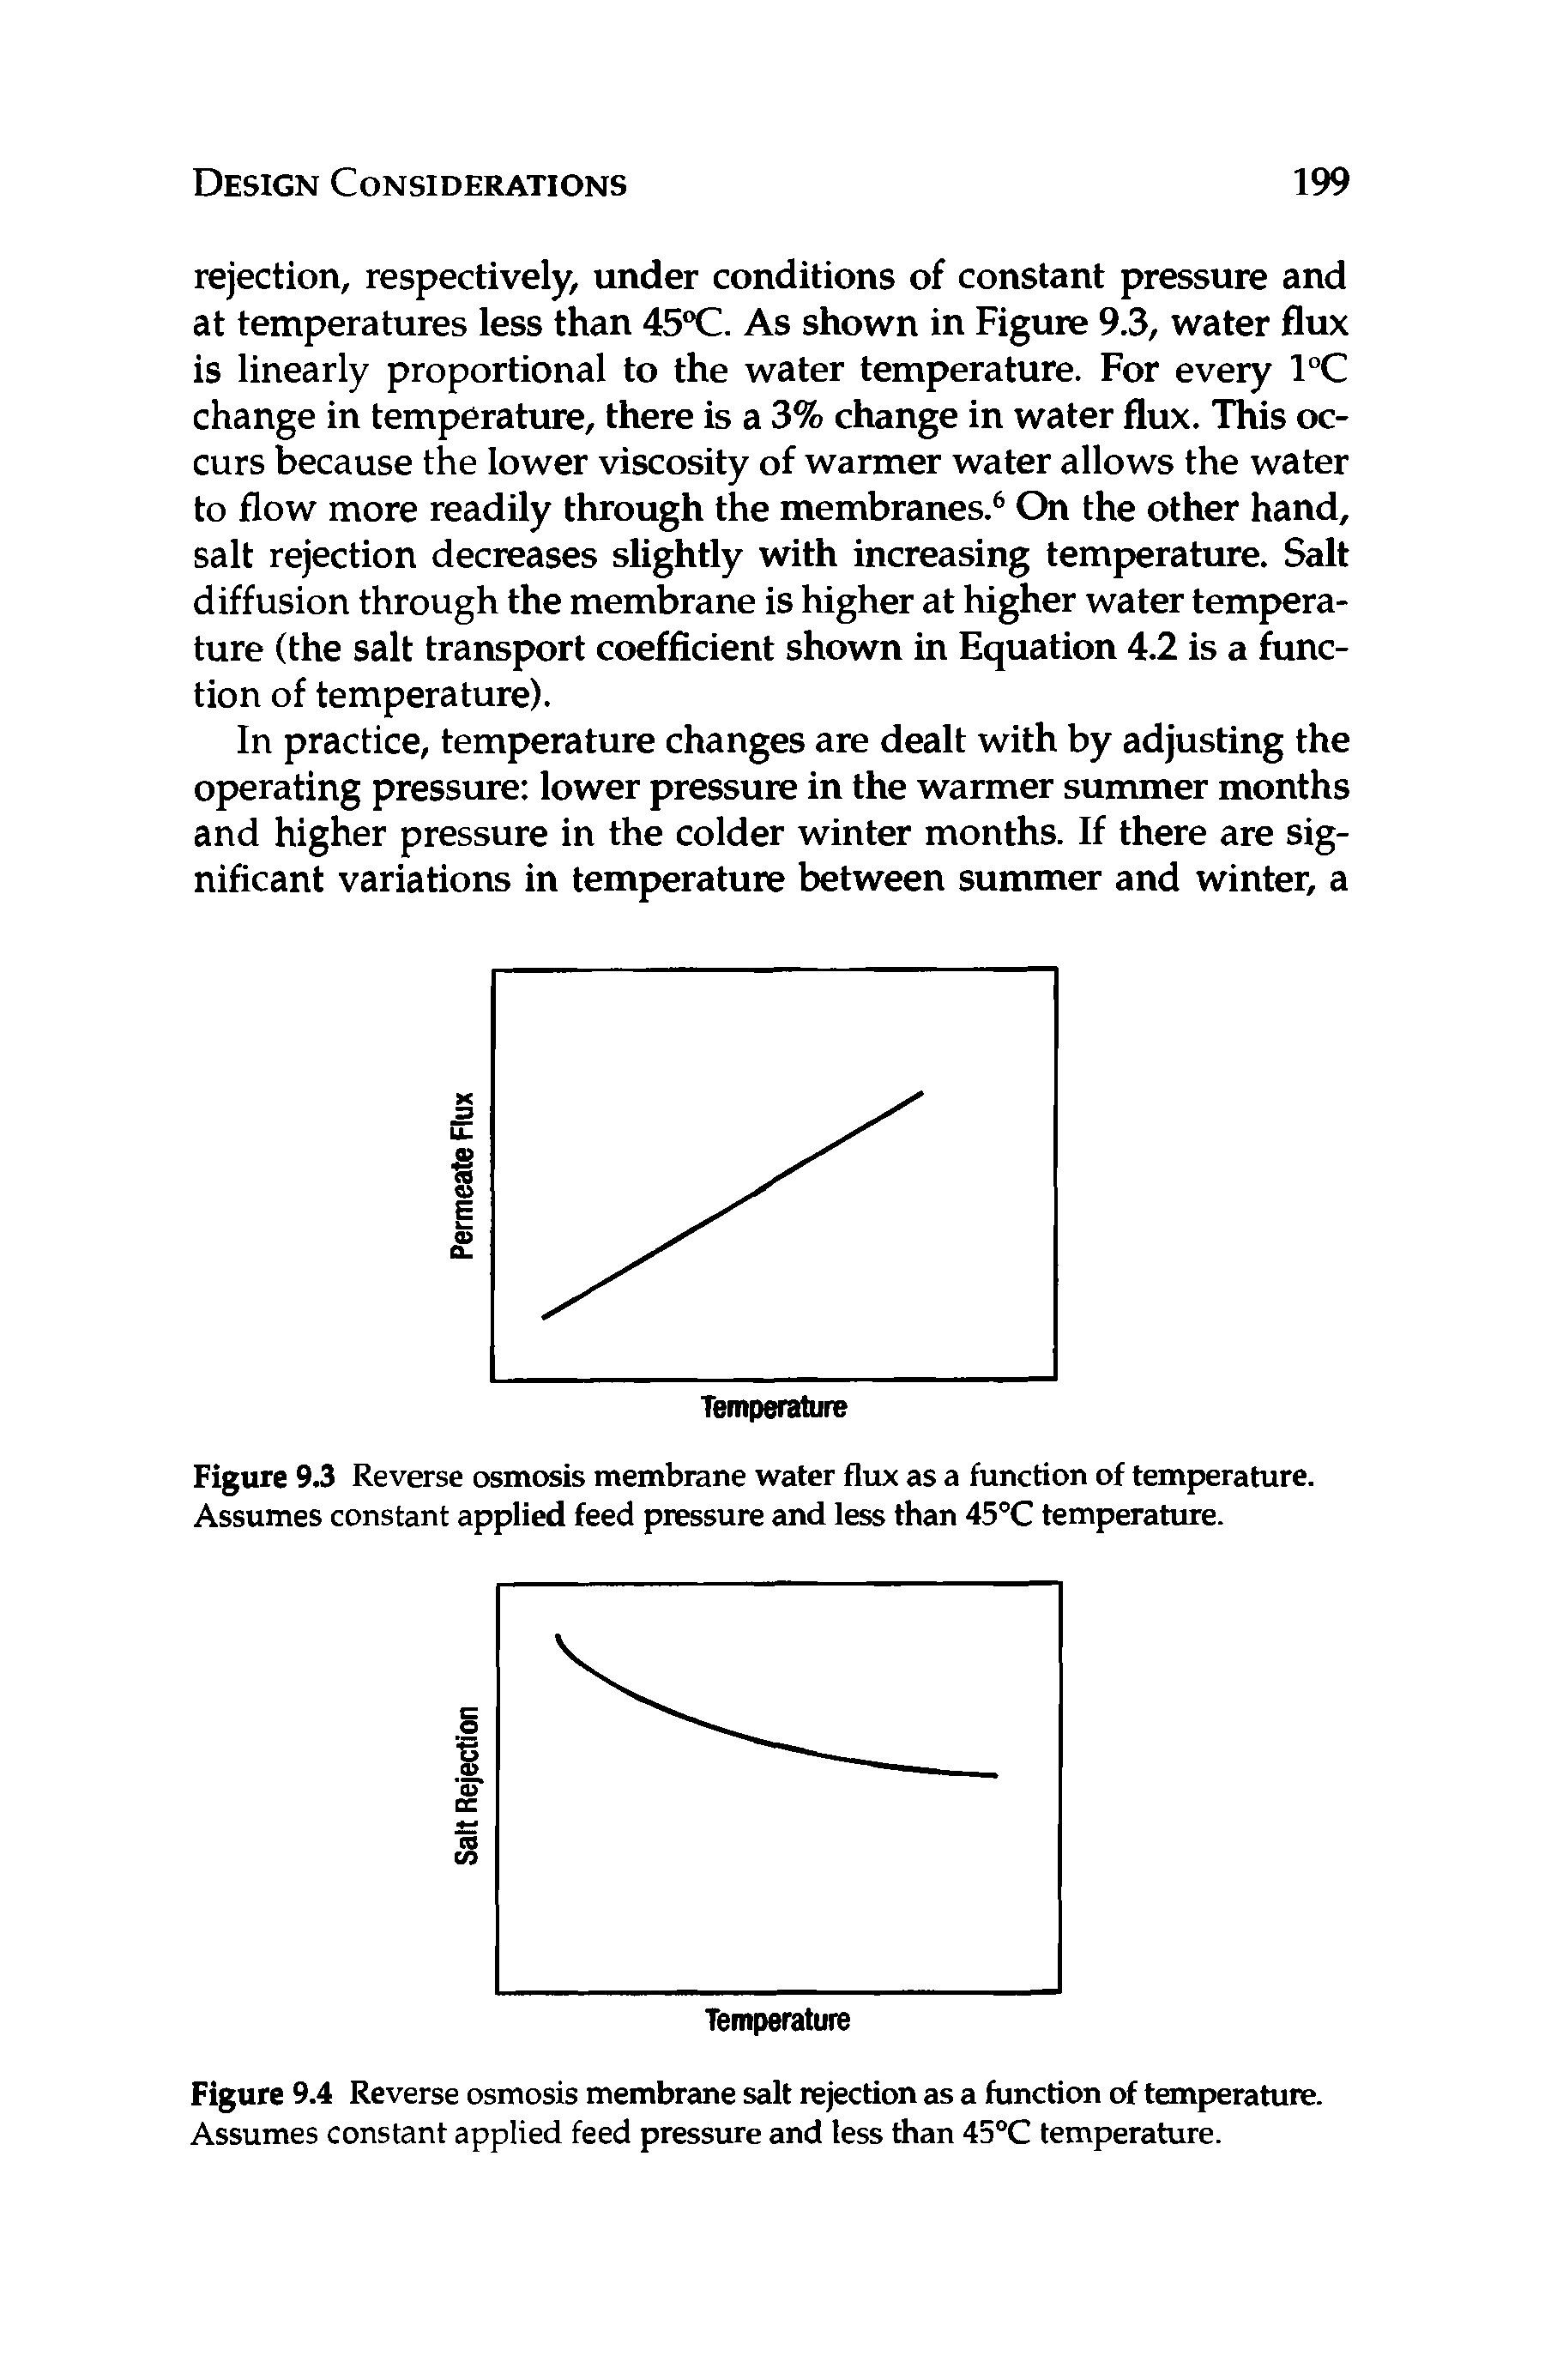 Figure 9.4 Reverse osmosis membrane salt rejection as a function of temperature. Assumes constant applied feed pressure and less than 45°C temperature.